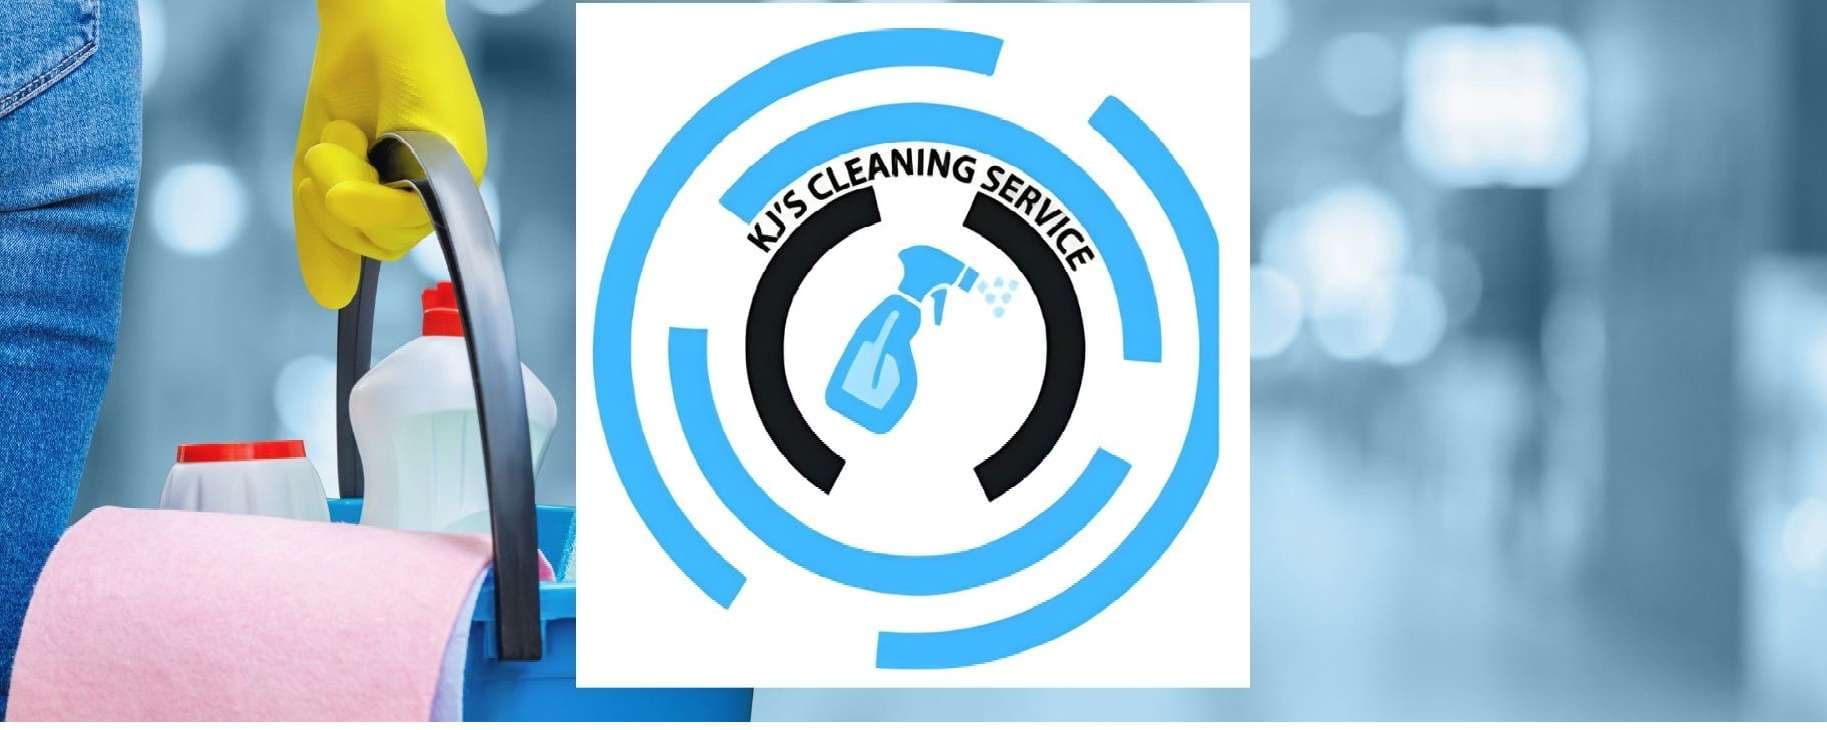 KJ's Cleaning Service